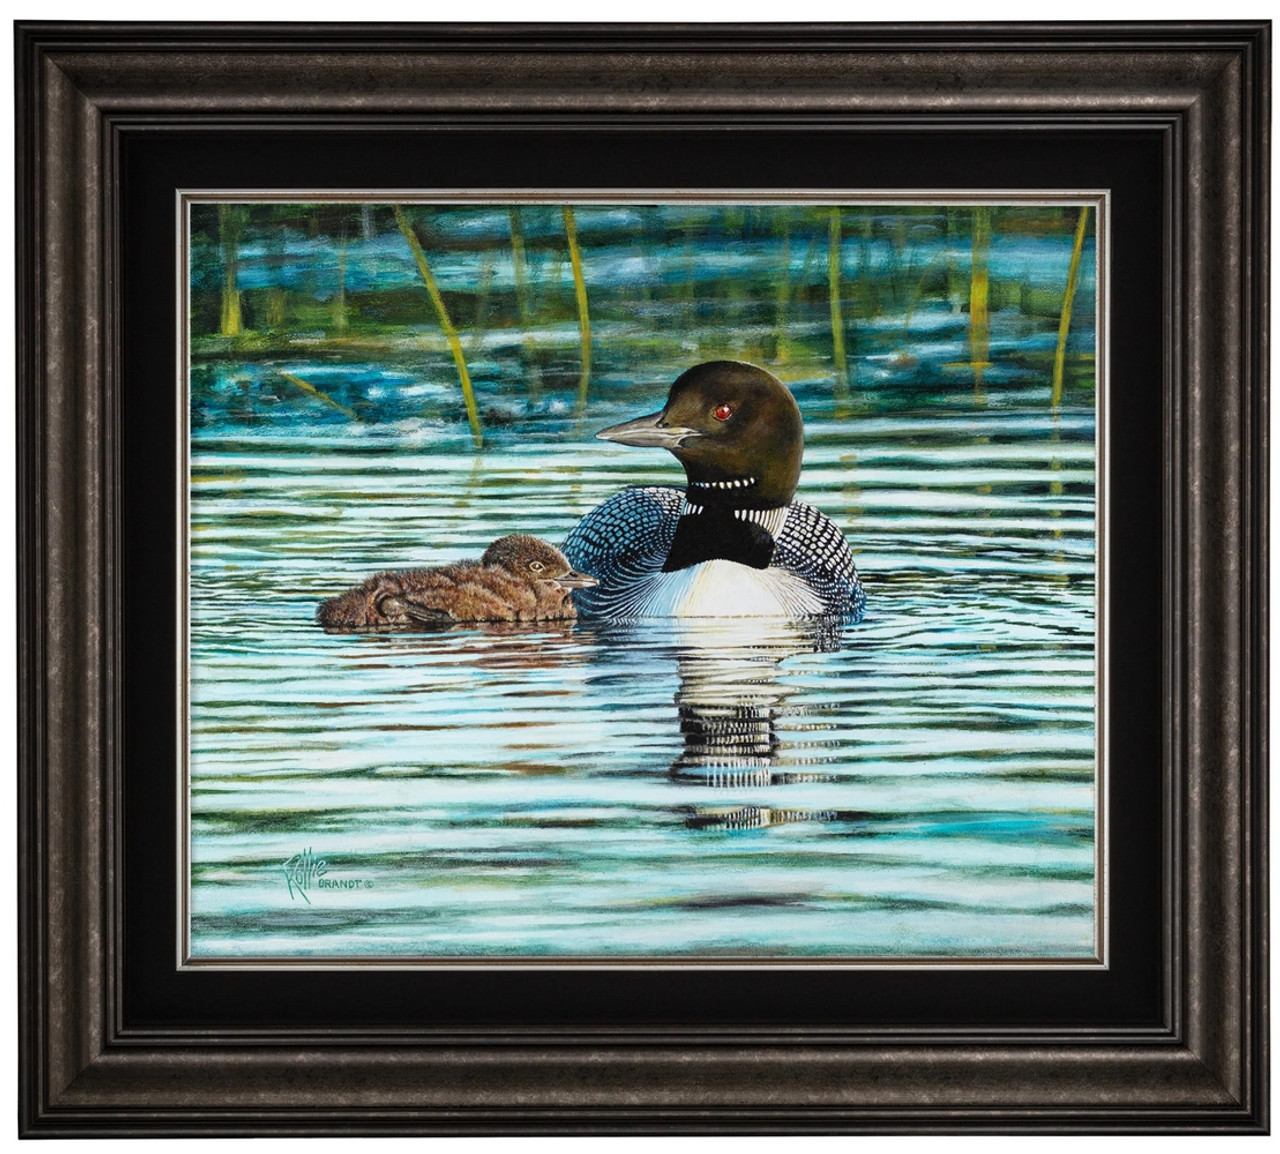 Swimming Lessons Original Painting on Canvas by Rollie Brandt